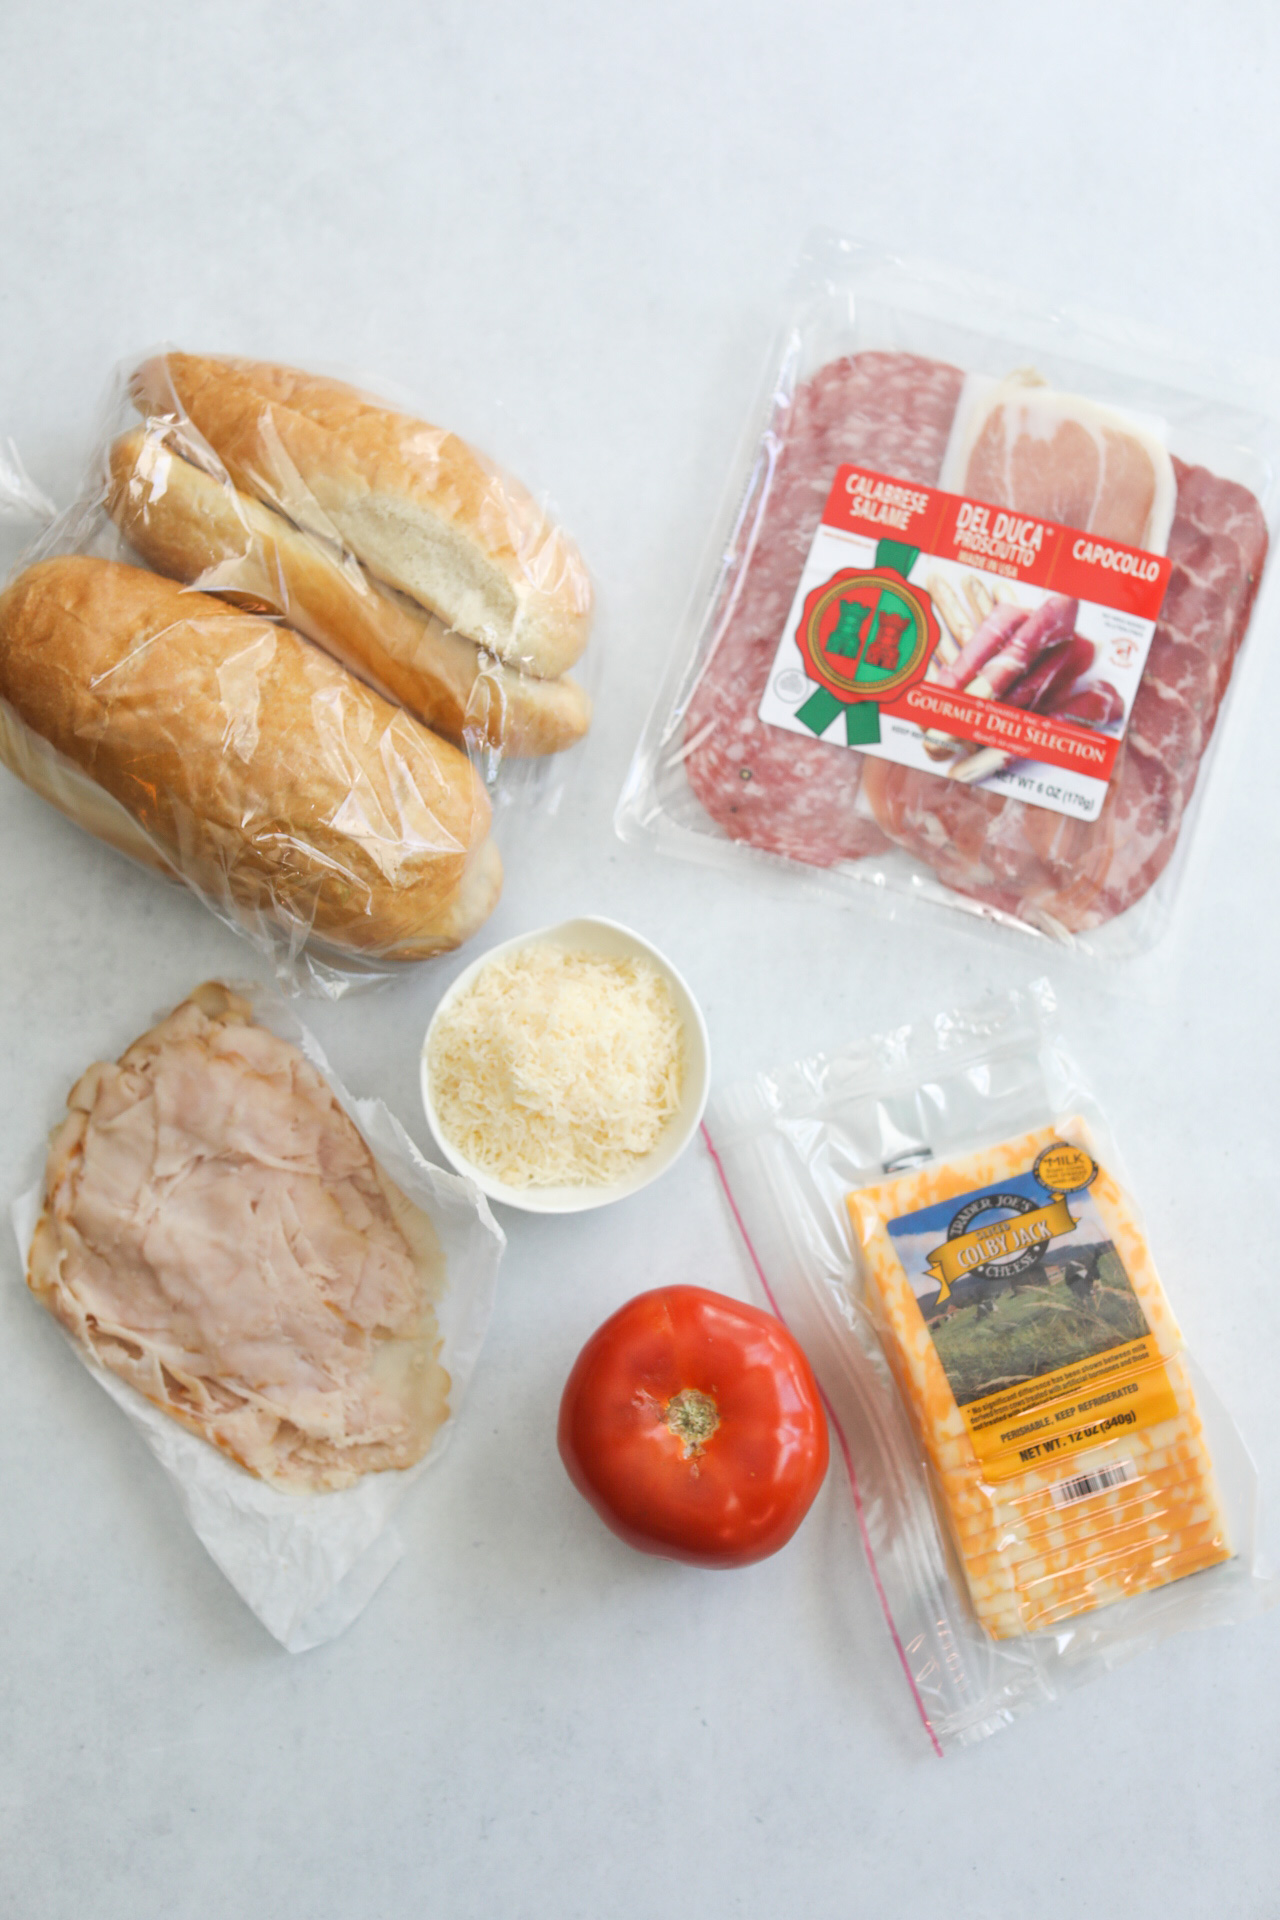 Italian Grinder ingredients on a flat lay. Italian meets packaged, crusty bread in a clear bag, white bowl filled with grated parmesan cheese, shaved turkey on parchment paper, a whole tomato and packaged sliced colby jack cheese.